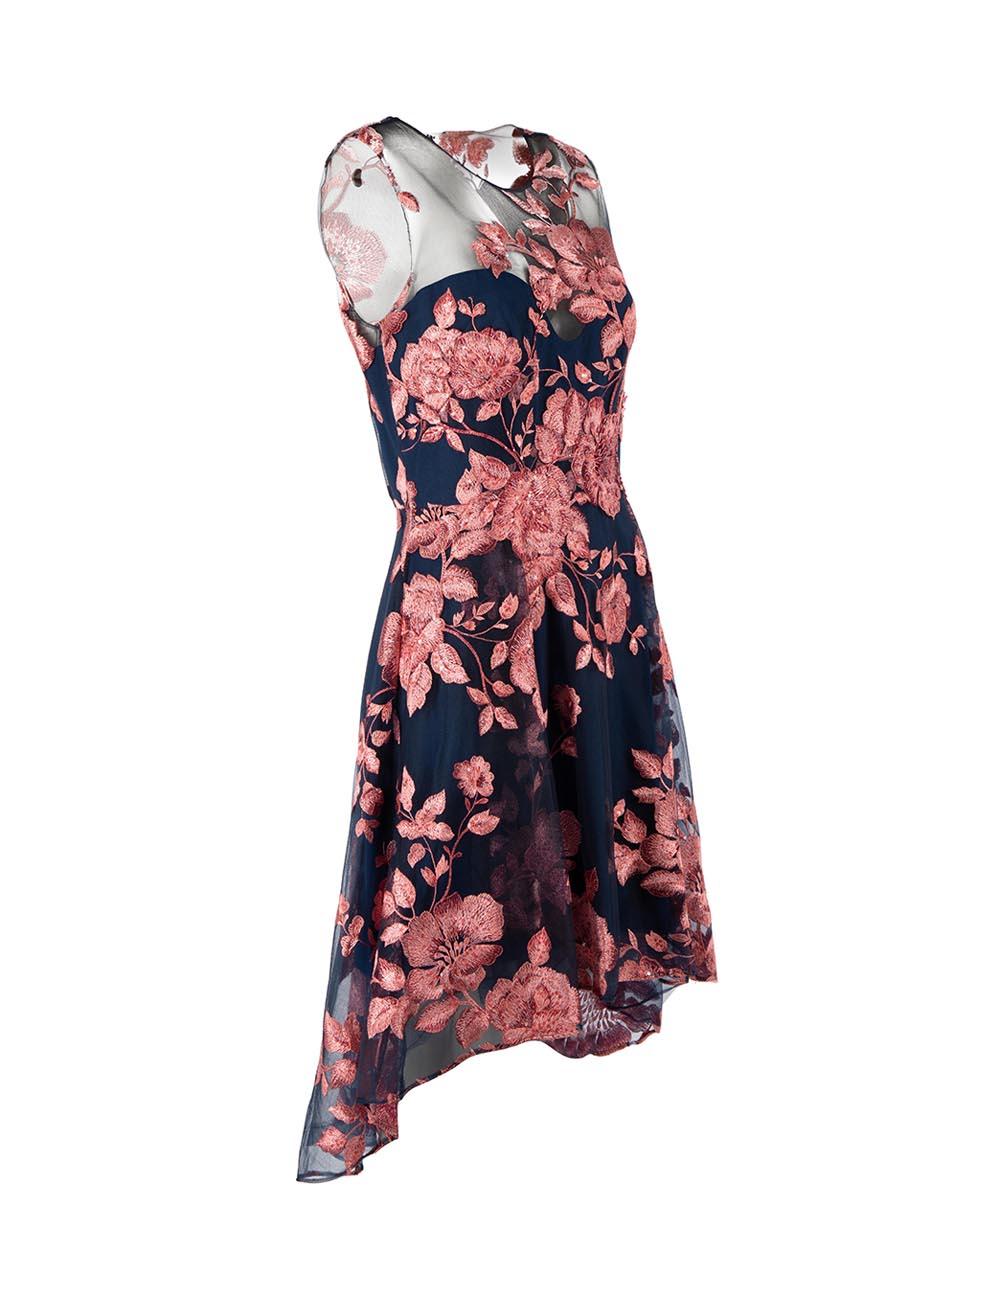 CONDITION is Very good. Minimal wear to dress is evident. Some loose threads to back of bodice on this used Marchesa designer resale item. 



Details


Navy

Synthetic

Knee length dress

Pink floral embroidered detail

Sheer on neckline

Round